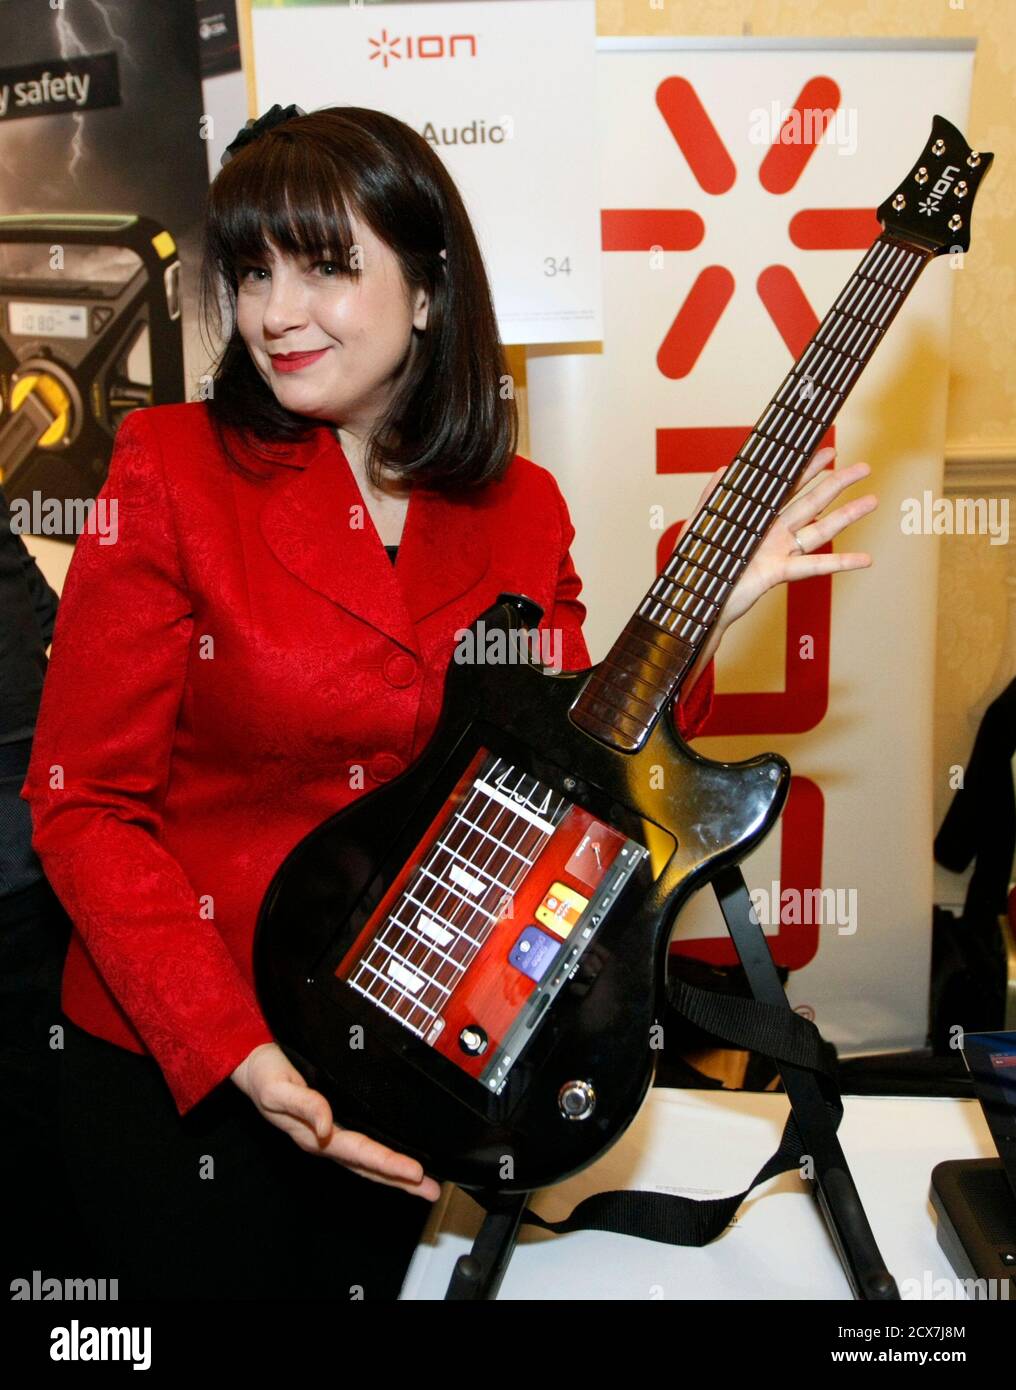 Wendy Mittelstadt, product manager for Ion, poses with the company's Guitar  Apprentice guitar controller for the iPad at the Consumer Electronics Show  (CES) opening event in Las Vegas January 8, 2012. The